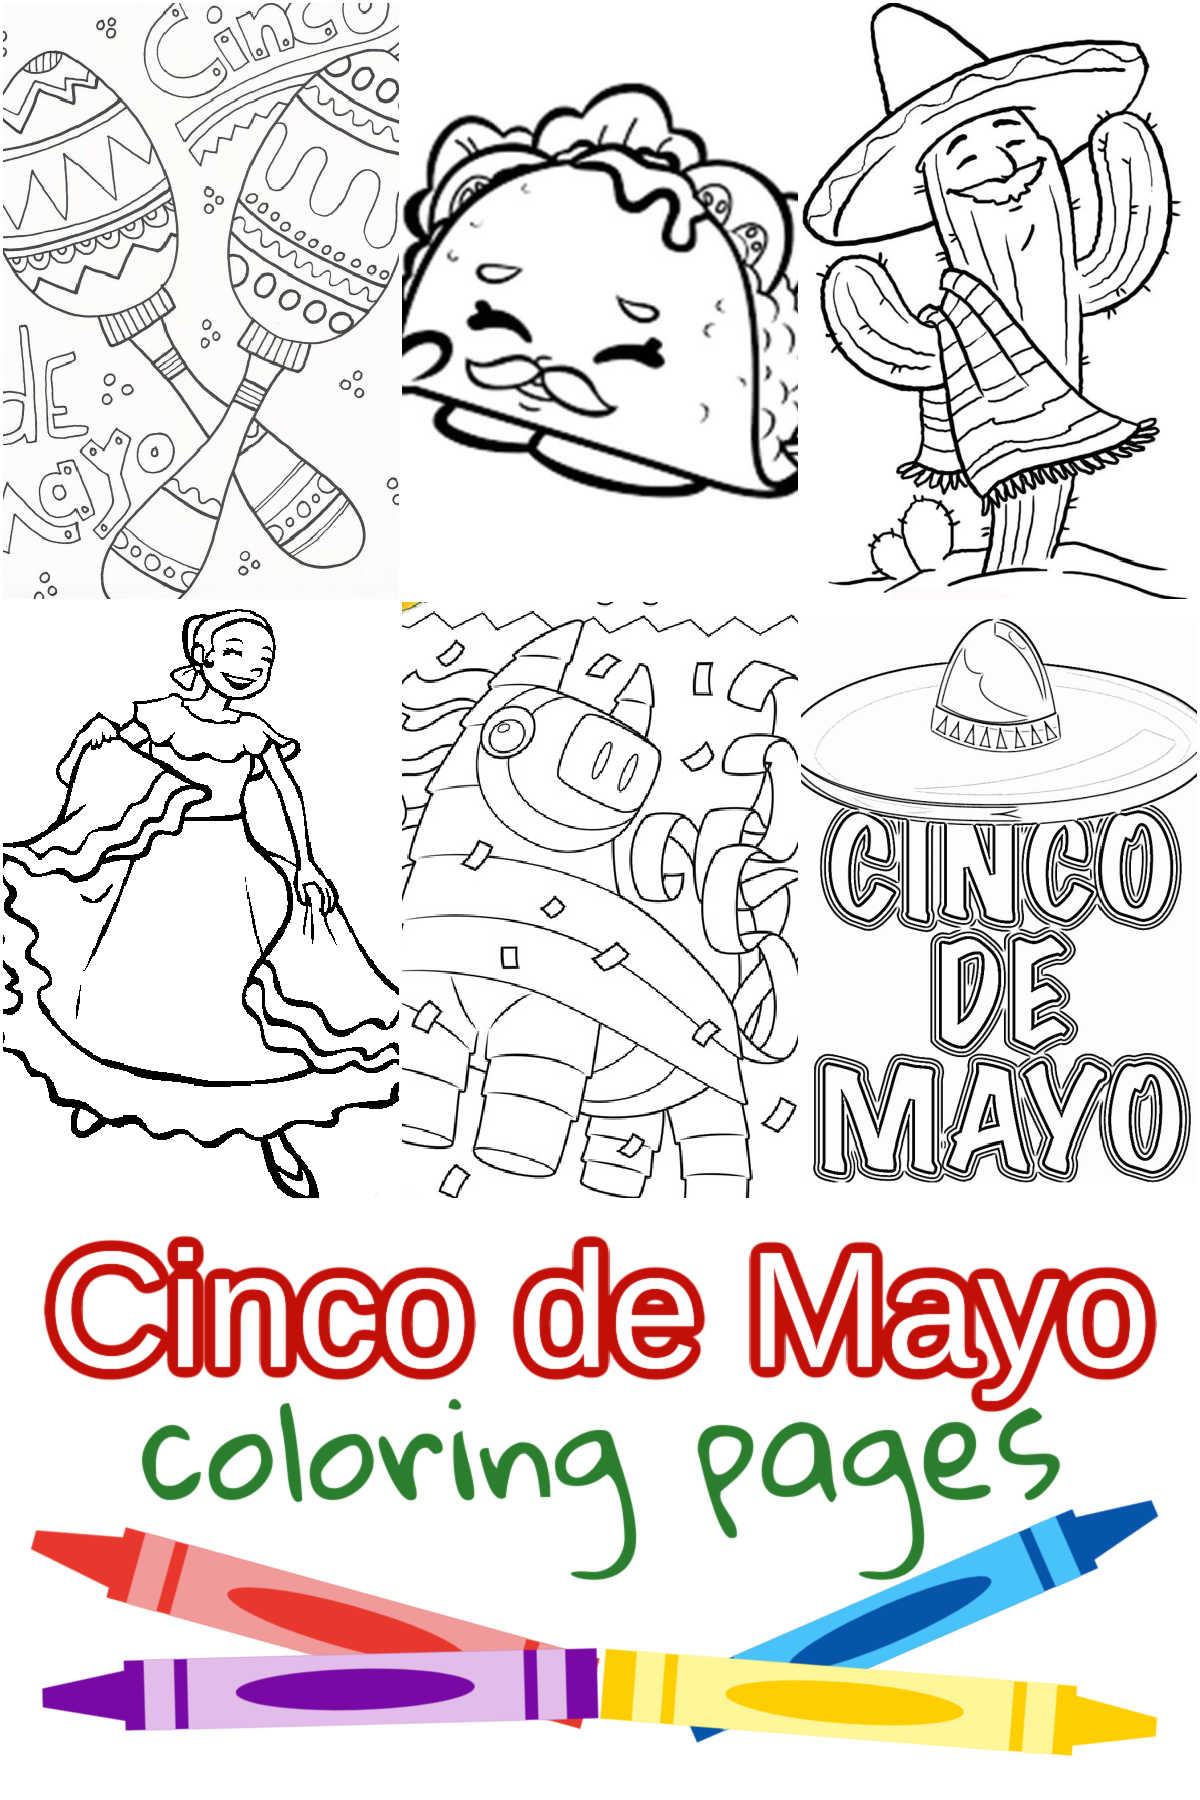 Collage of Cinco de Mayo Coloring Pages